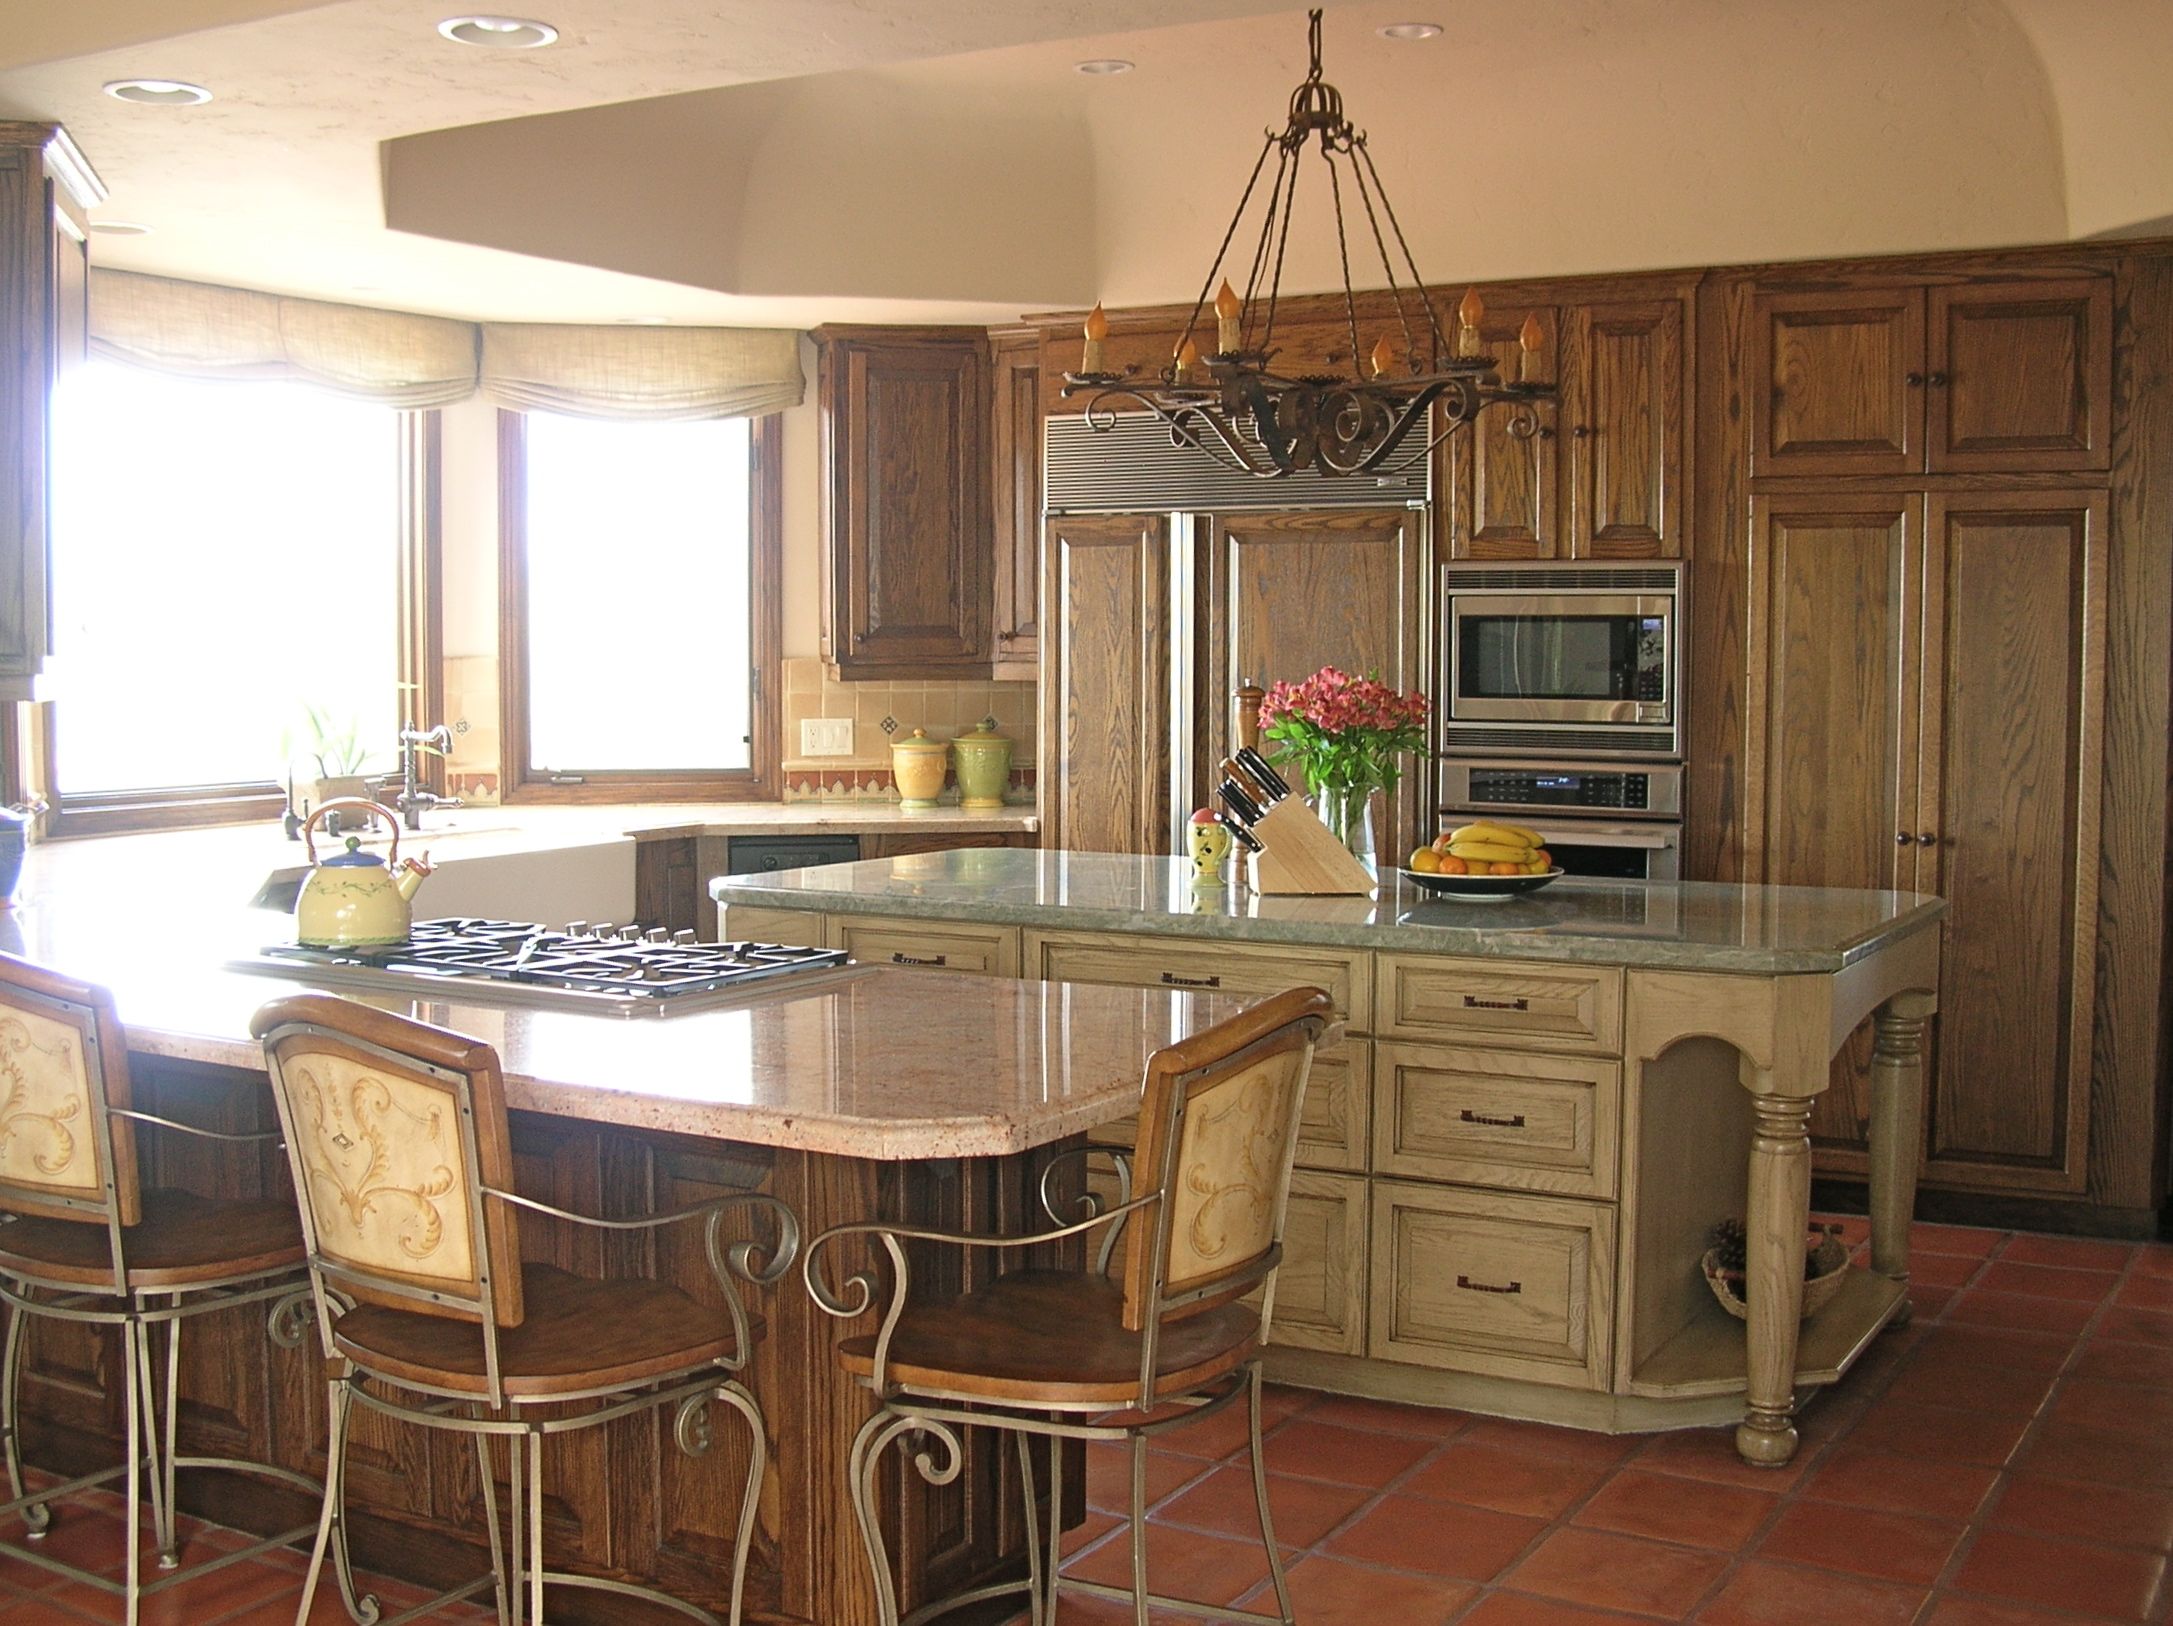 remodeled_kitchen_with_coved_ceiling_island_dining_peninsula_and_antique_chandelier_3